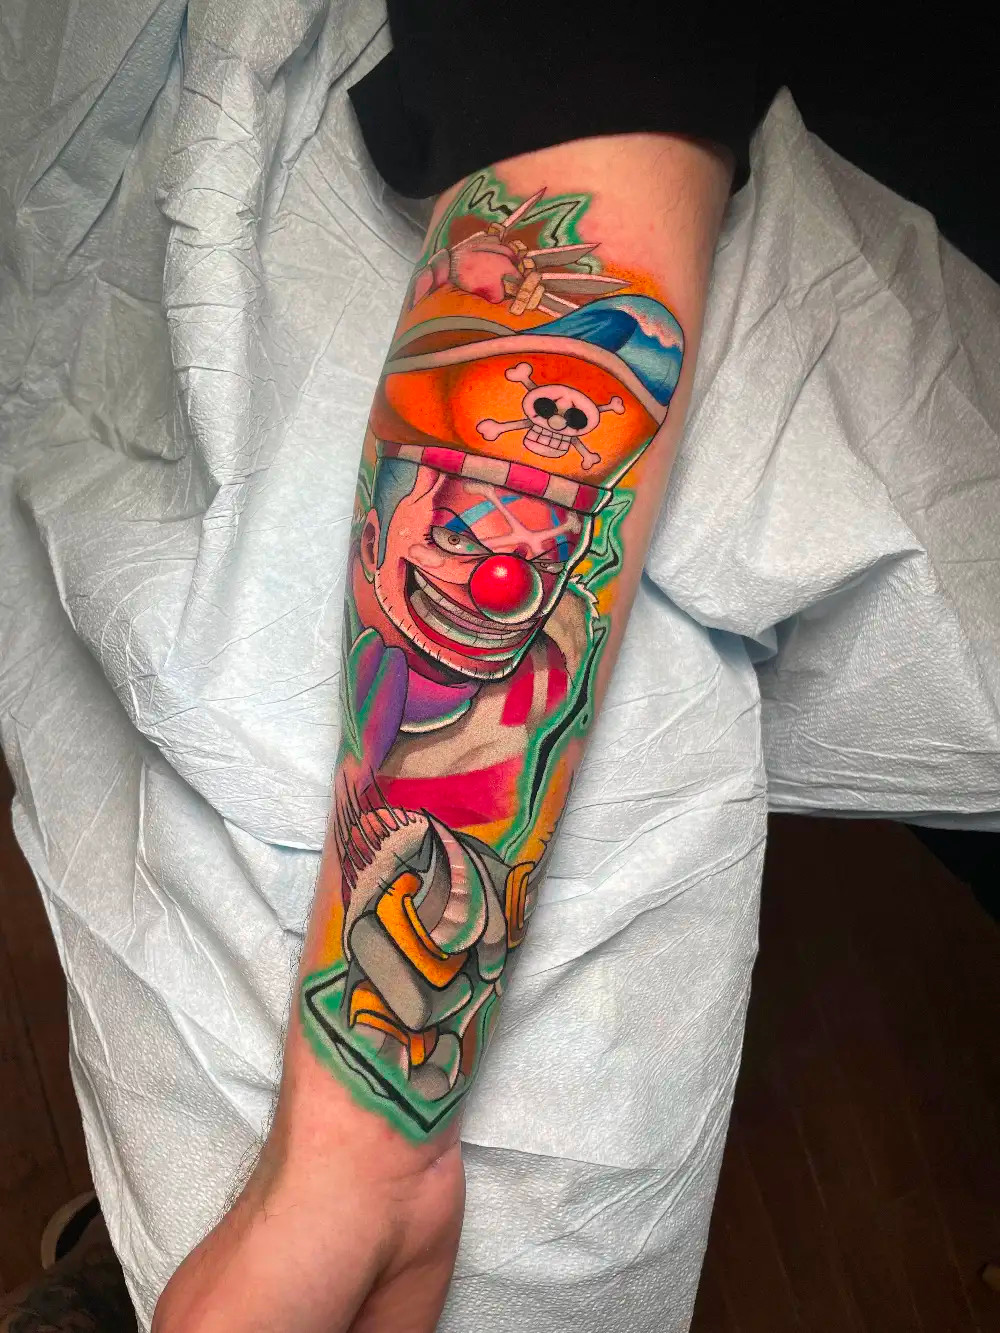 Buggy the Clown by Mae Thurman at Ohio City Tattoo